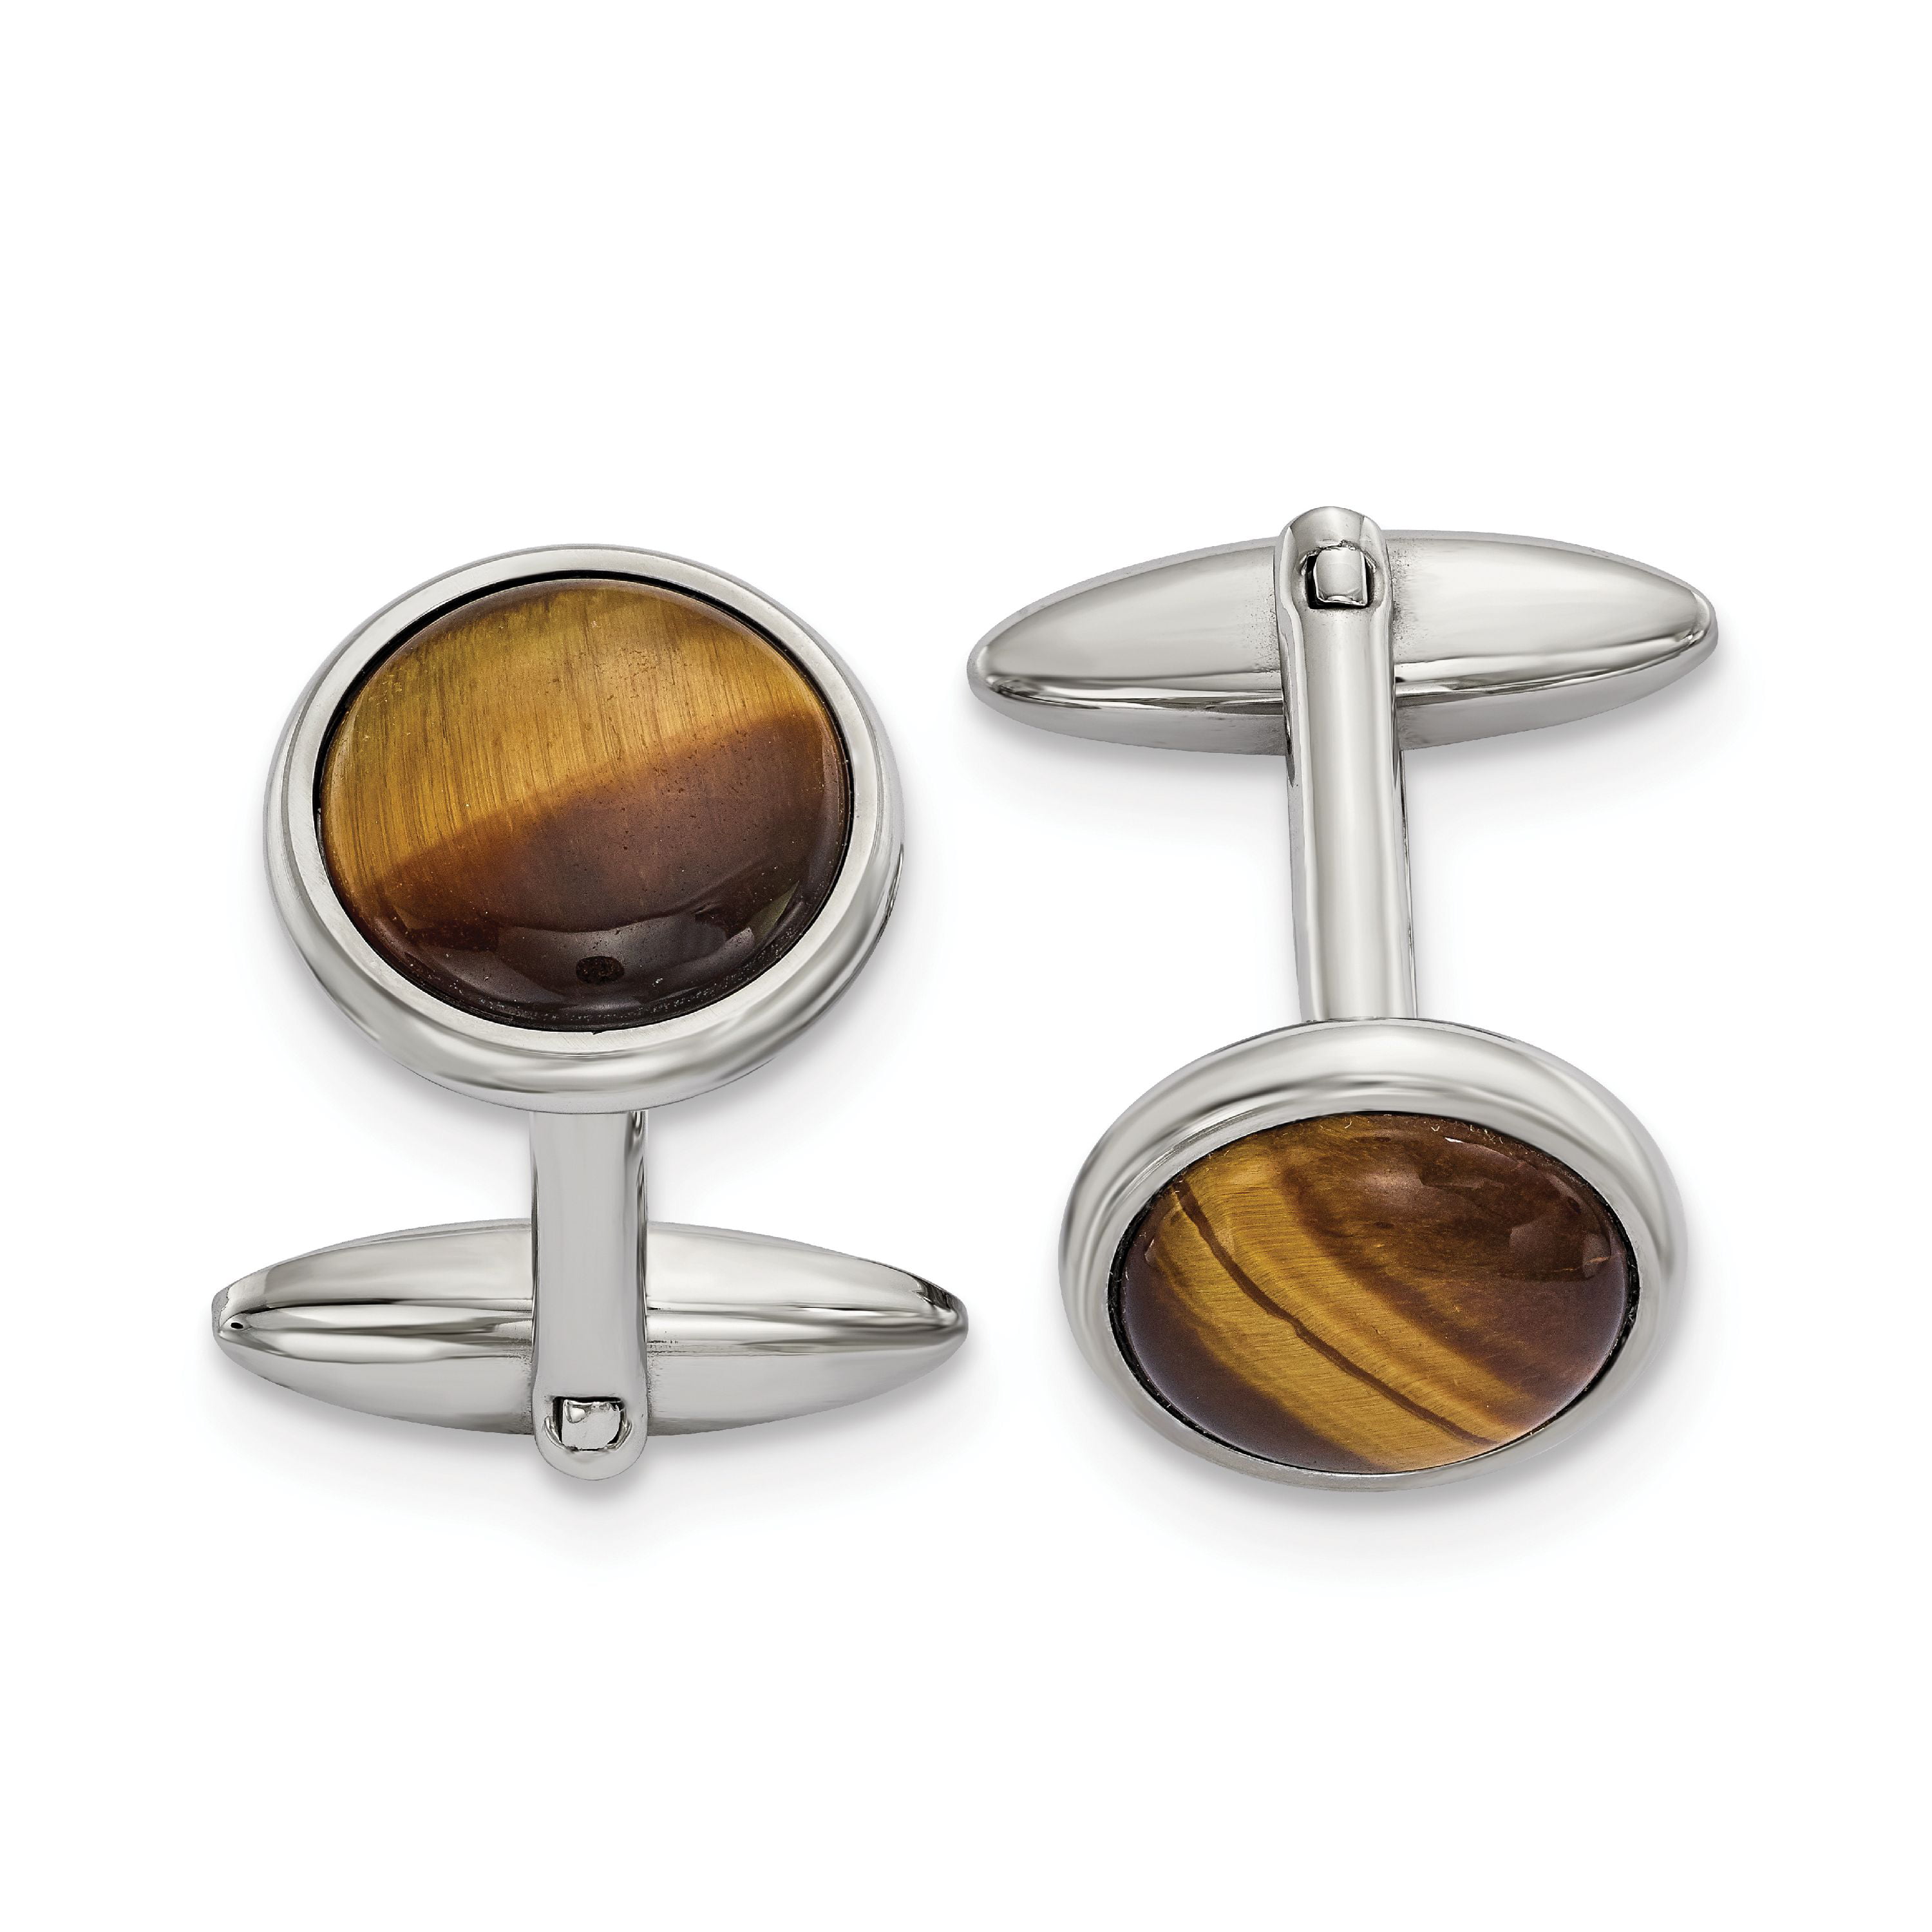 Buy Stainless Steel Polished Tigers Eye Cuff Links at Walmart.com. 